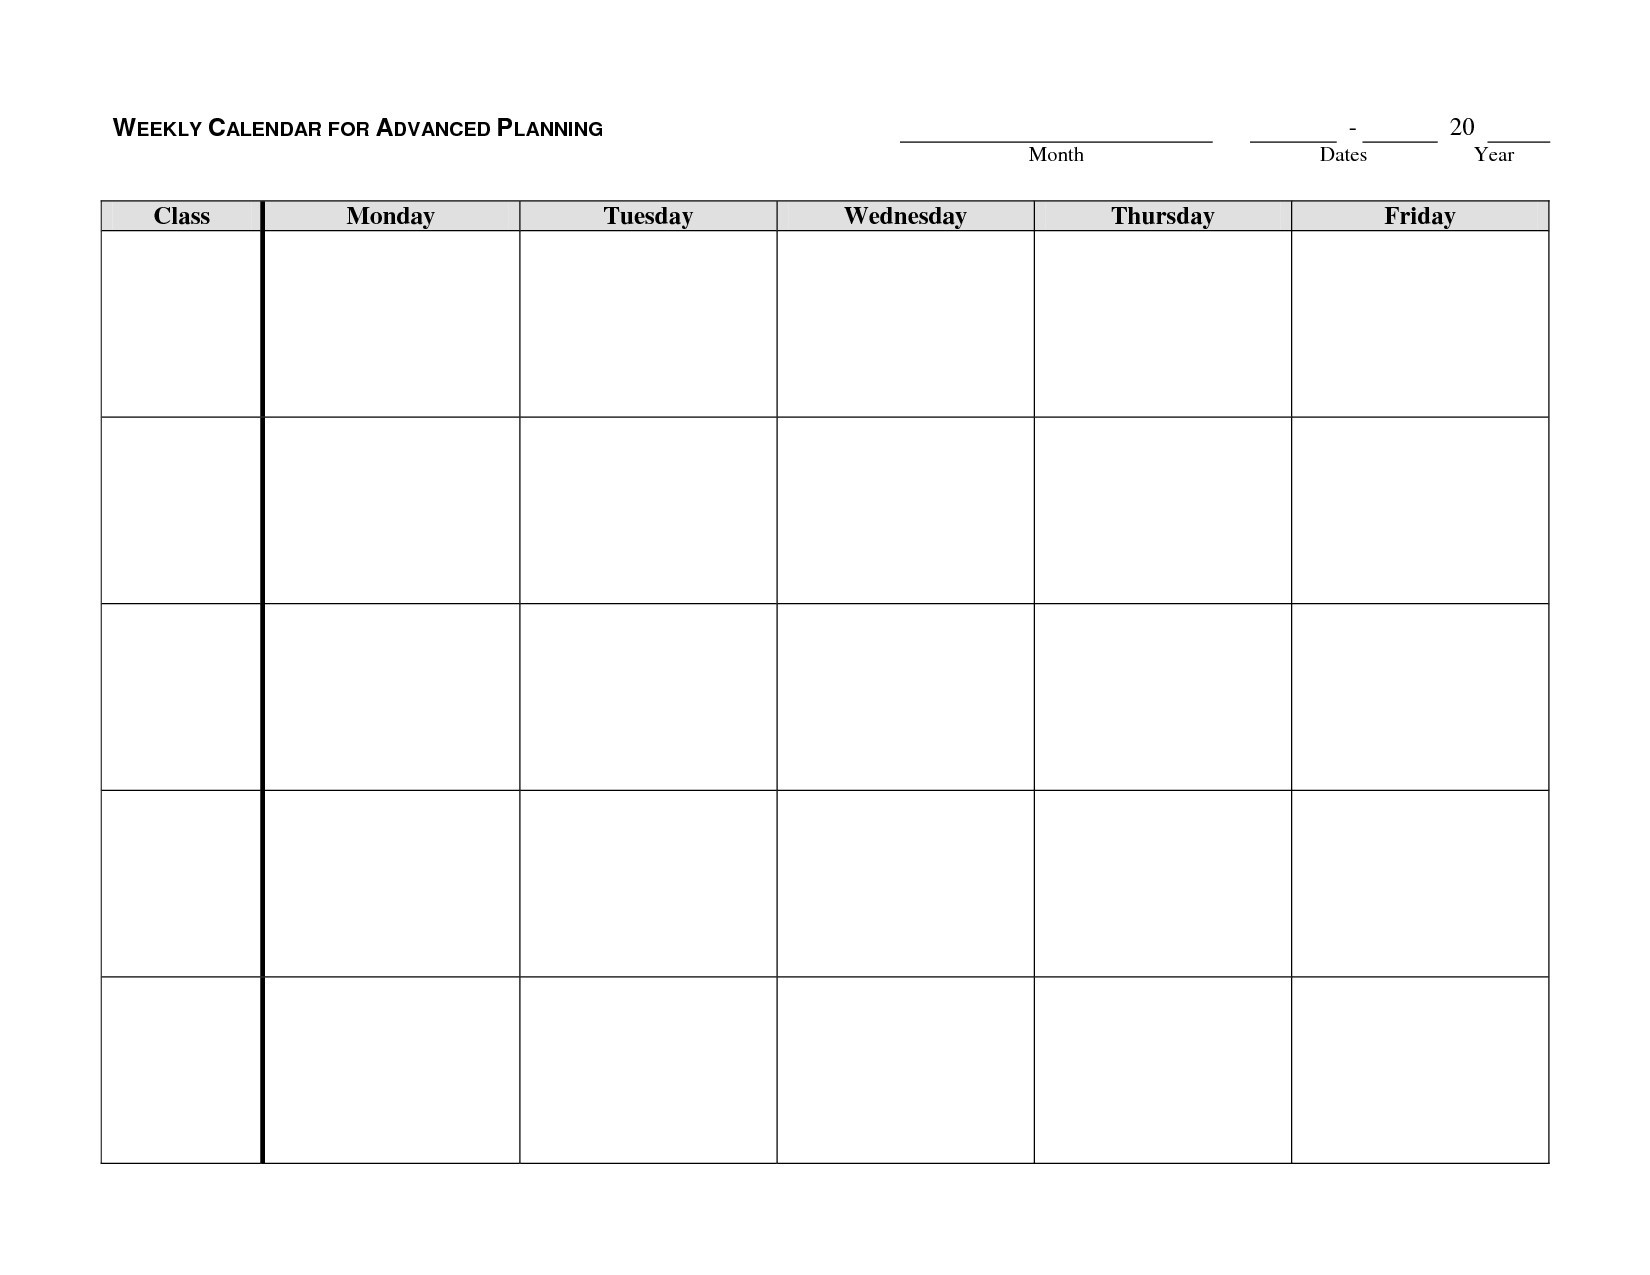 monday-friday-blank-weekly-schedule-calendar-template-printable